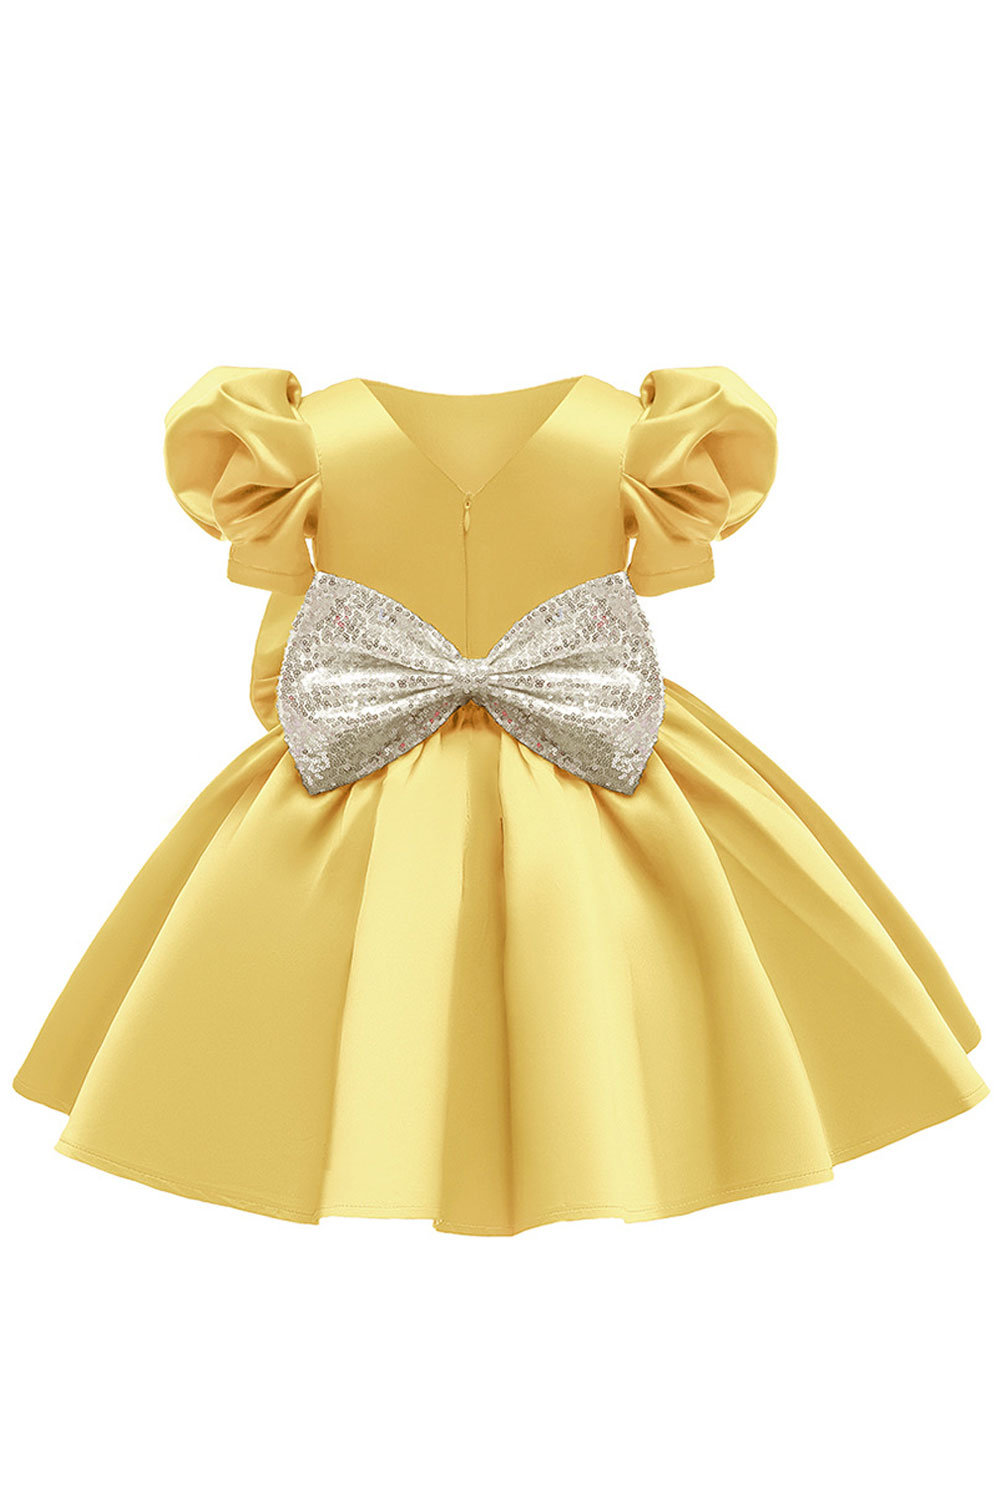 Selected Color is D0812 lemon yellow